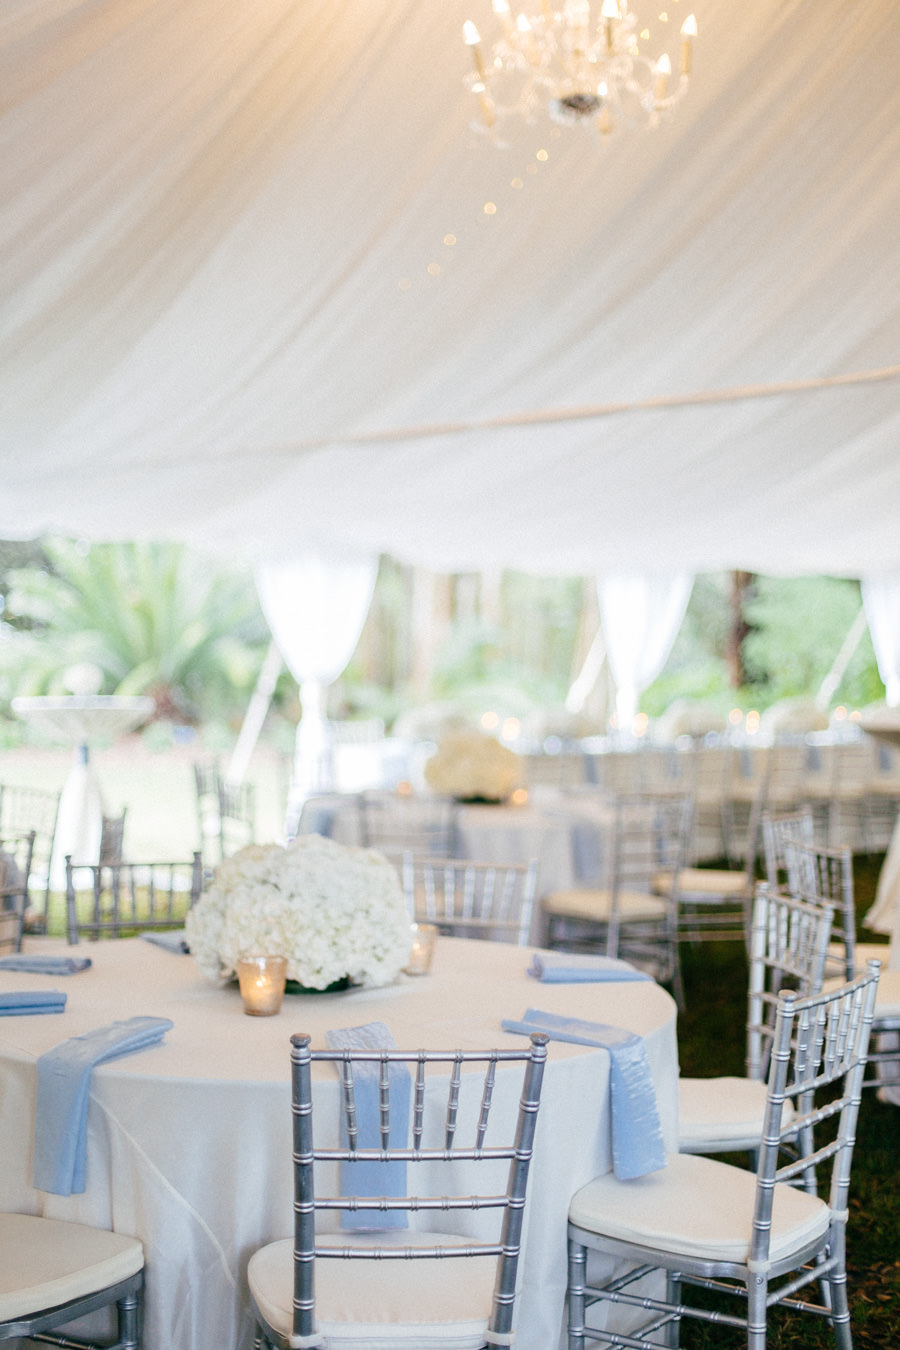 Wedding Reception Table Decor with Silver Chiavari Chairs, Blue Crushed Linens and White Floral Hydrangeaa Centerpieces